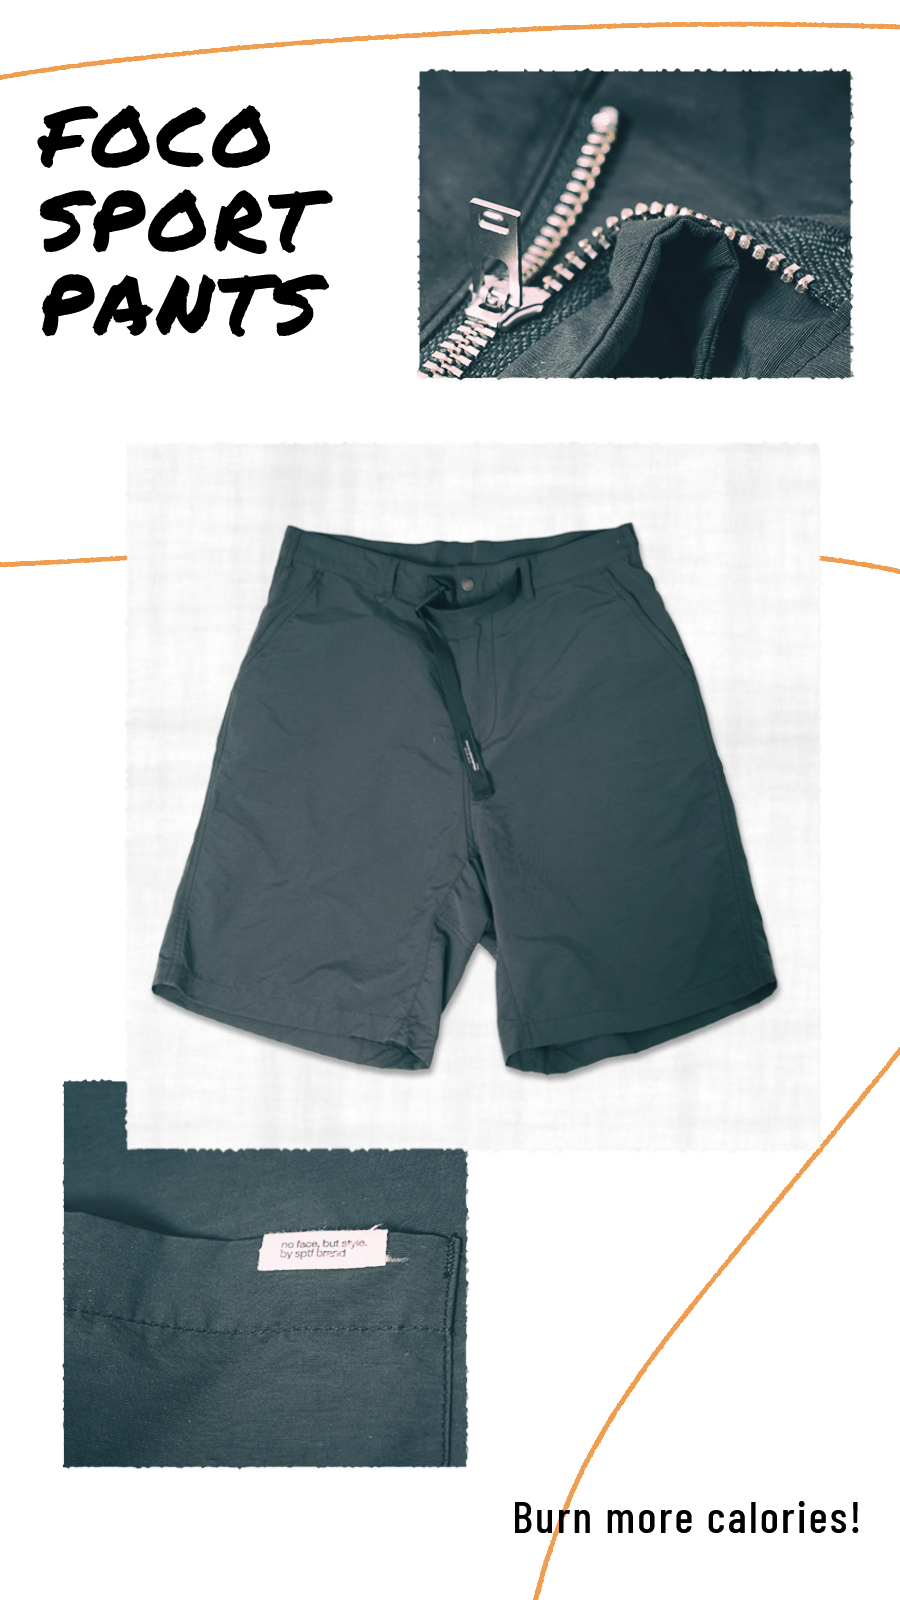 Simple Style Sport Pants Display Ecommerce Story预览效果